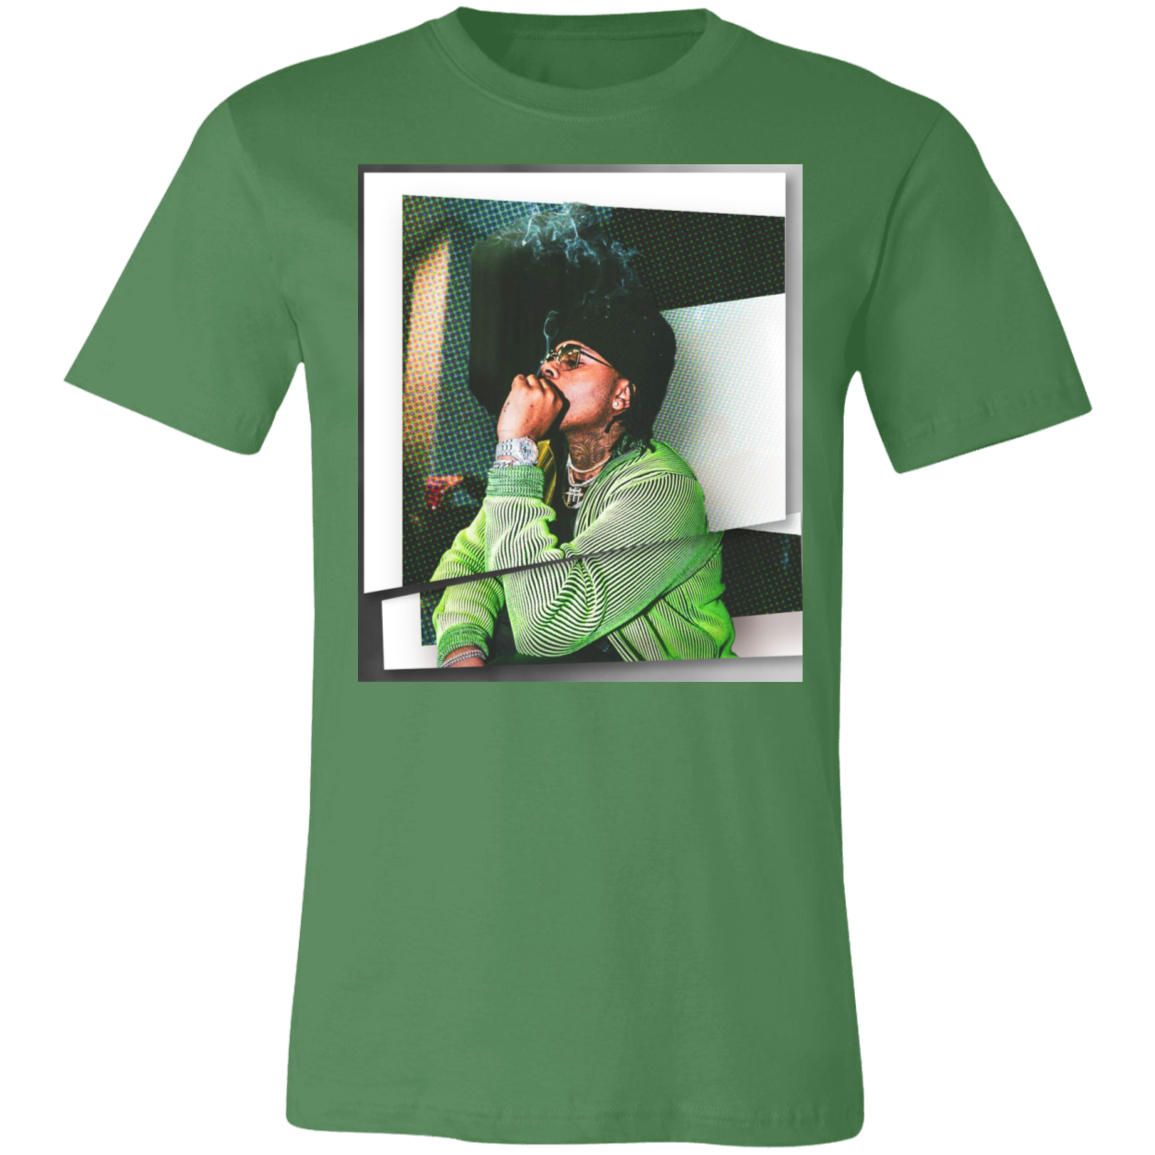 gunna graphic tee in green